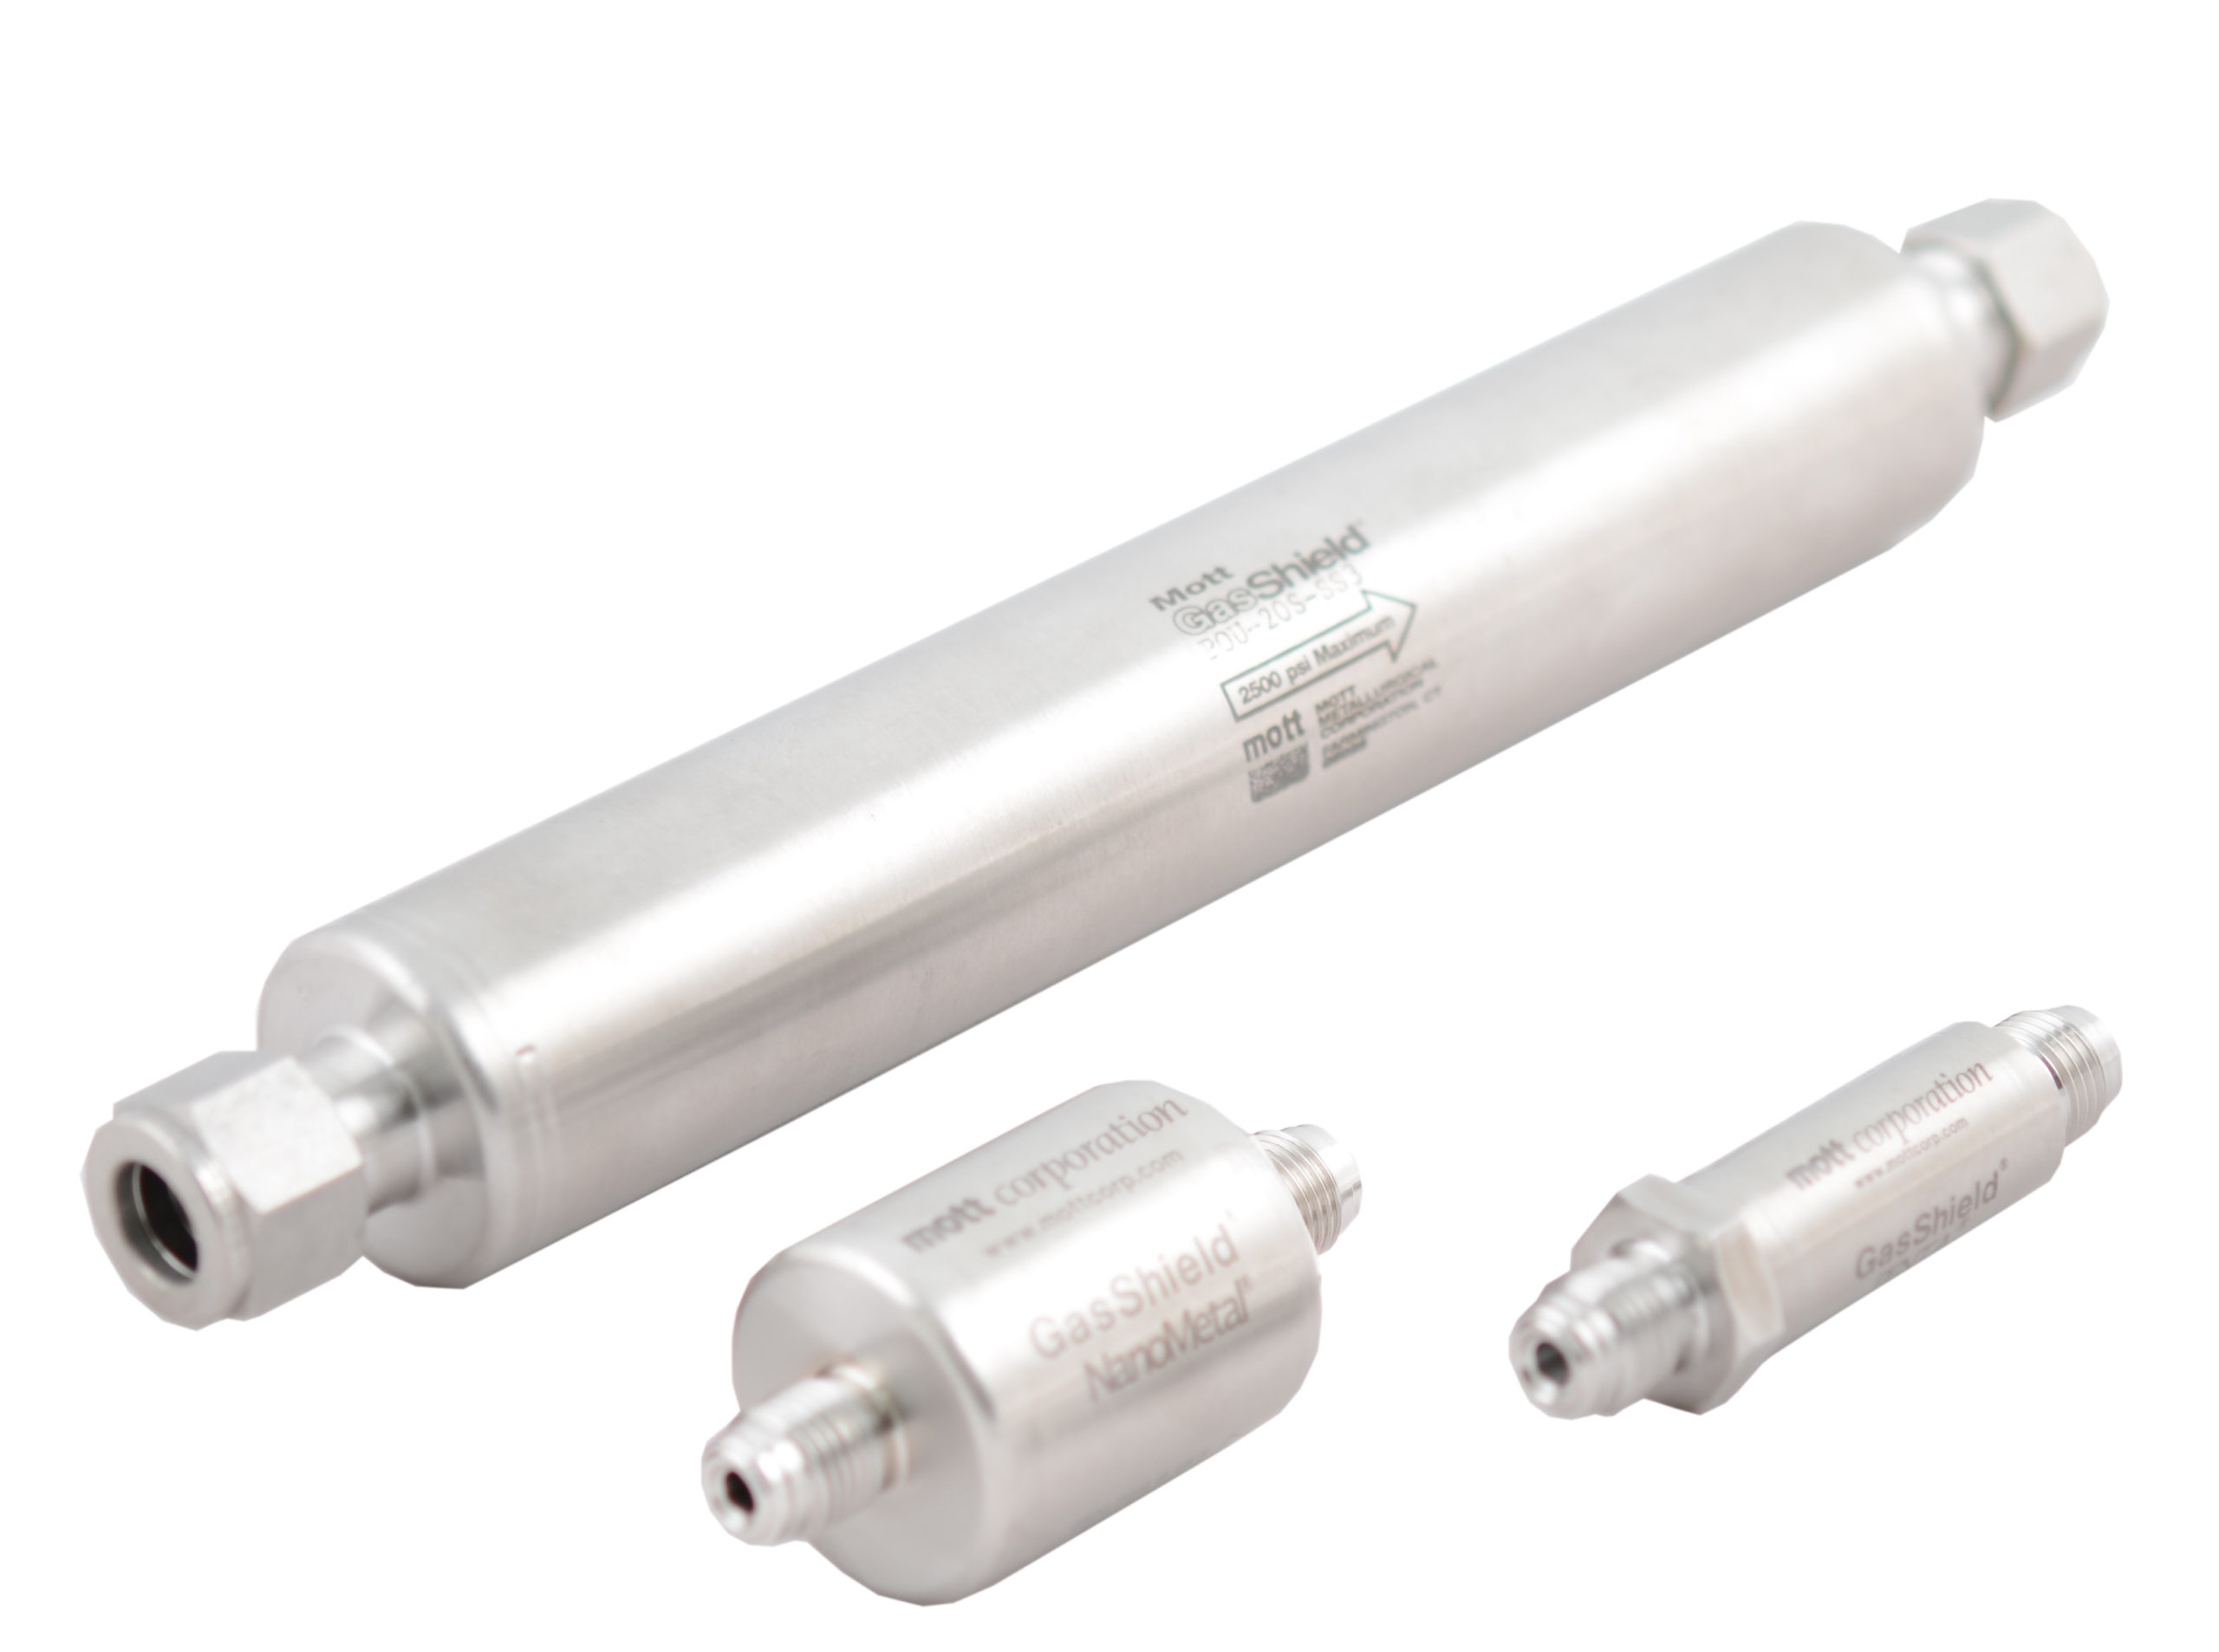 MOTT ultra high purity filters, capable of filtering 1,5nm particles.